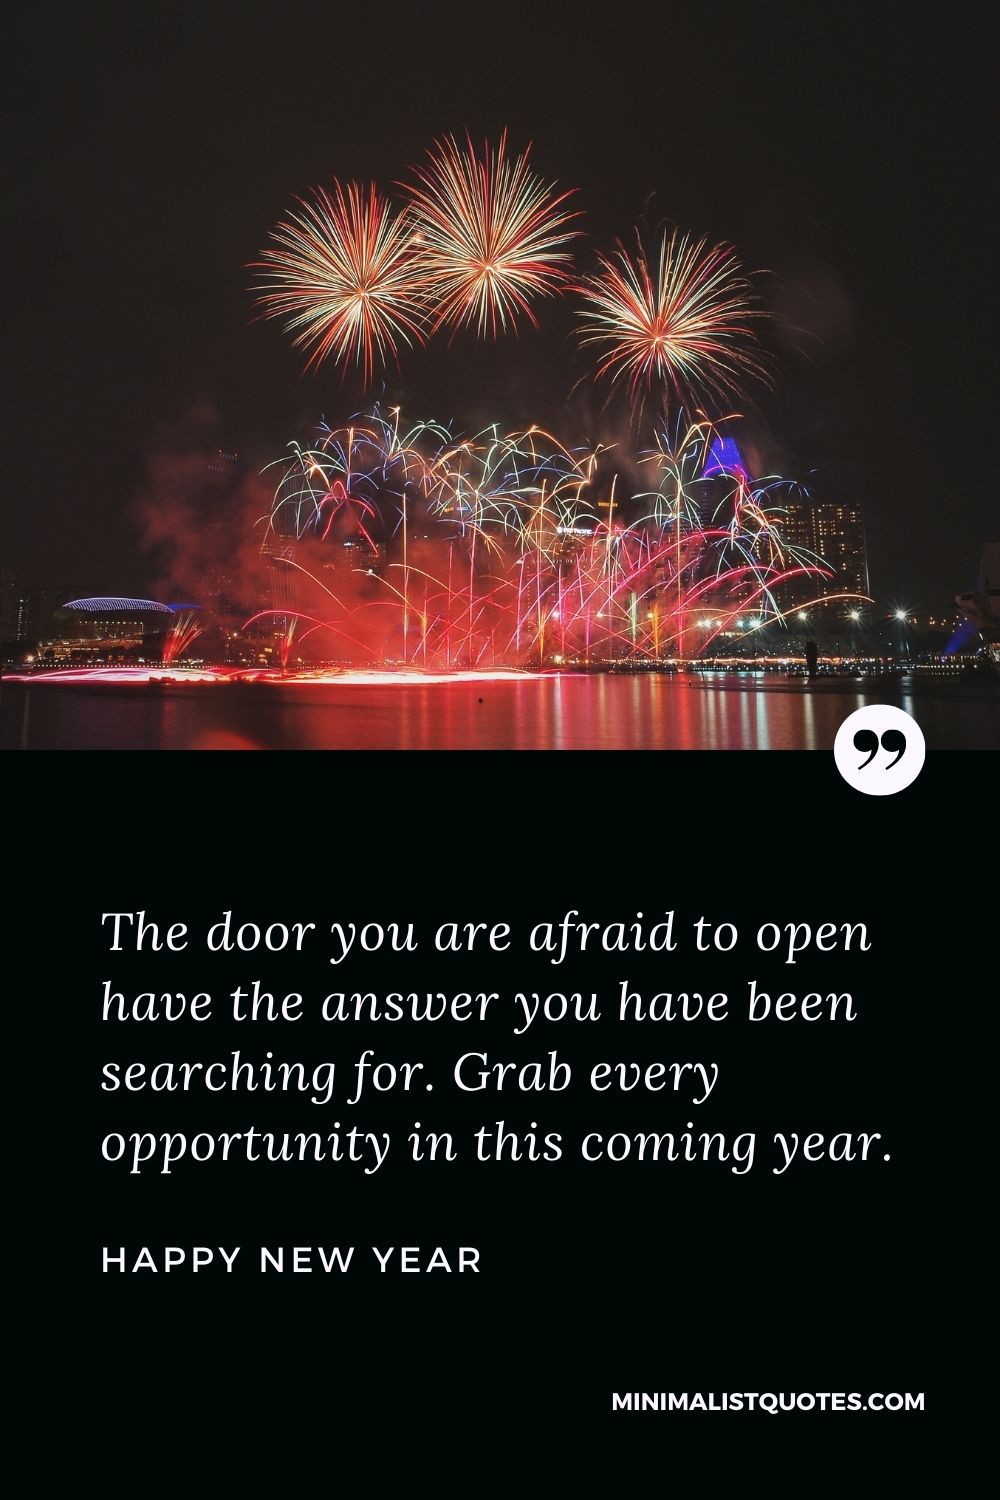 New Year Wish - The door you are afraid to open have the answer you have been searching for. Grab every opportunity in this coming year.